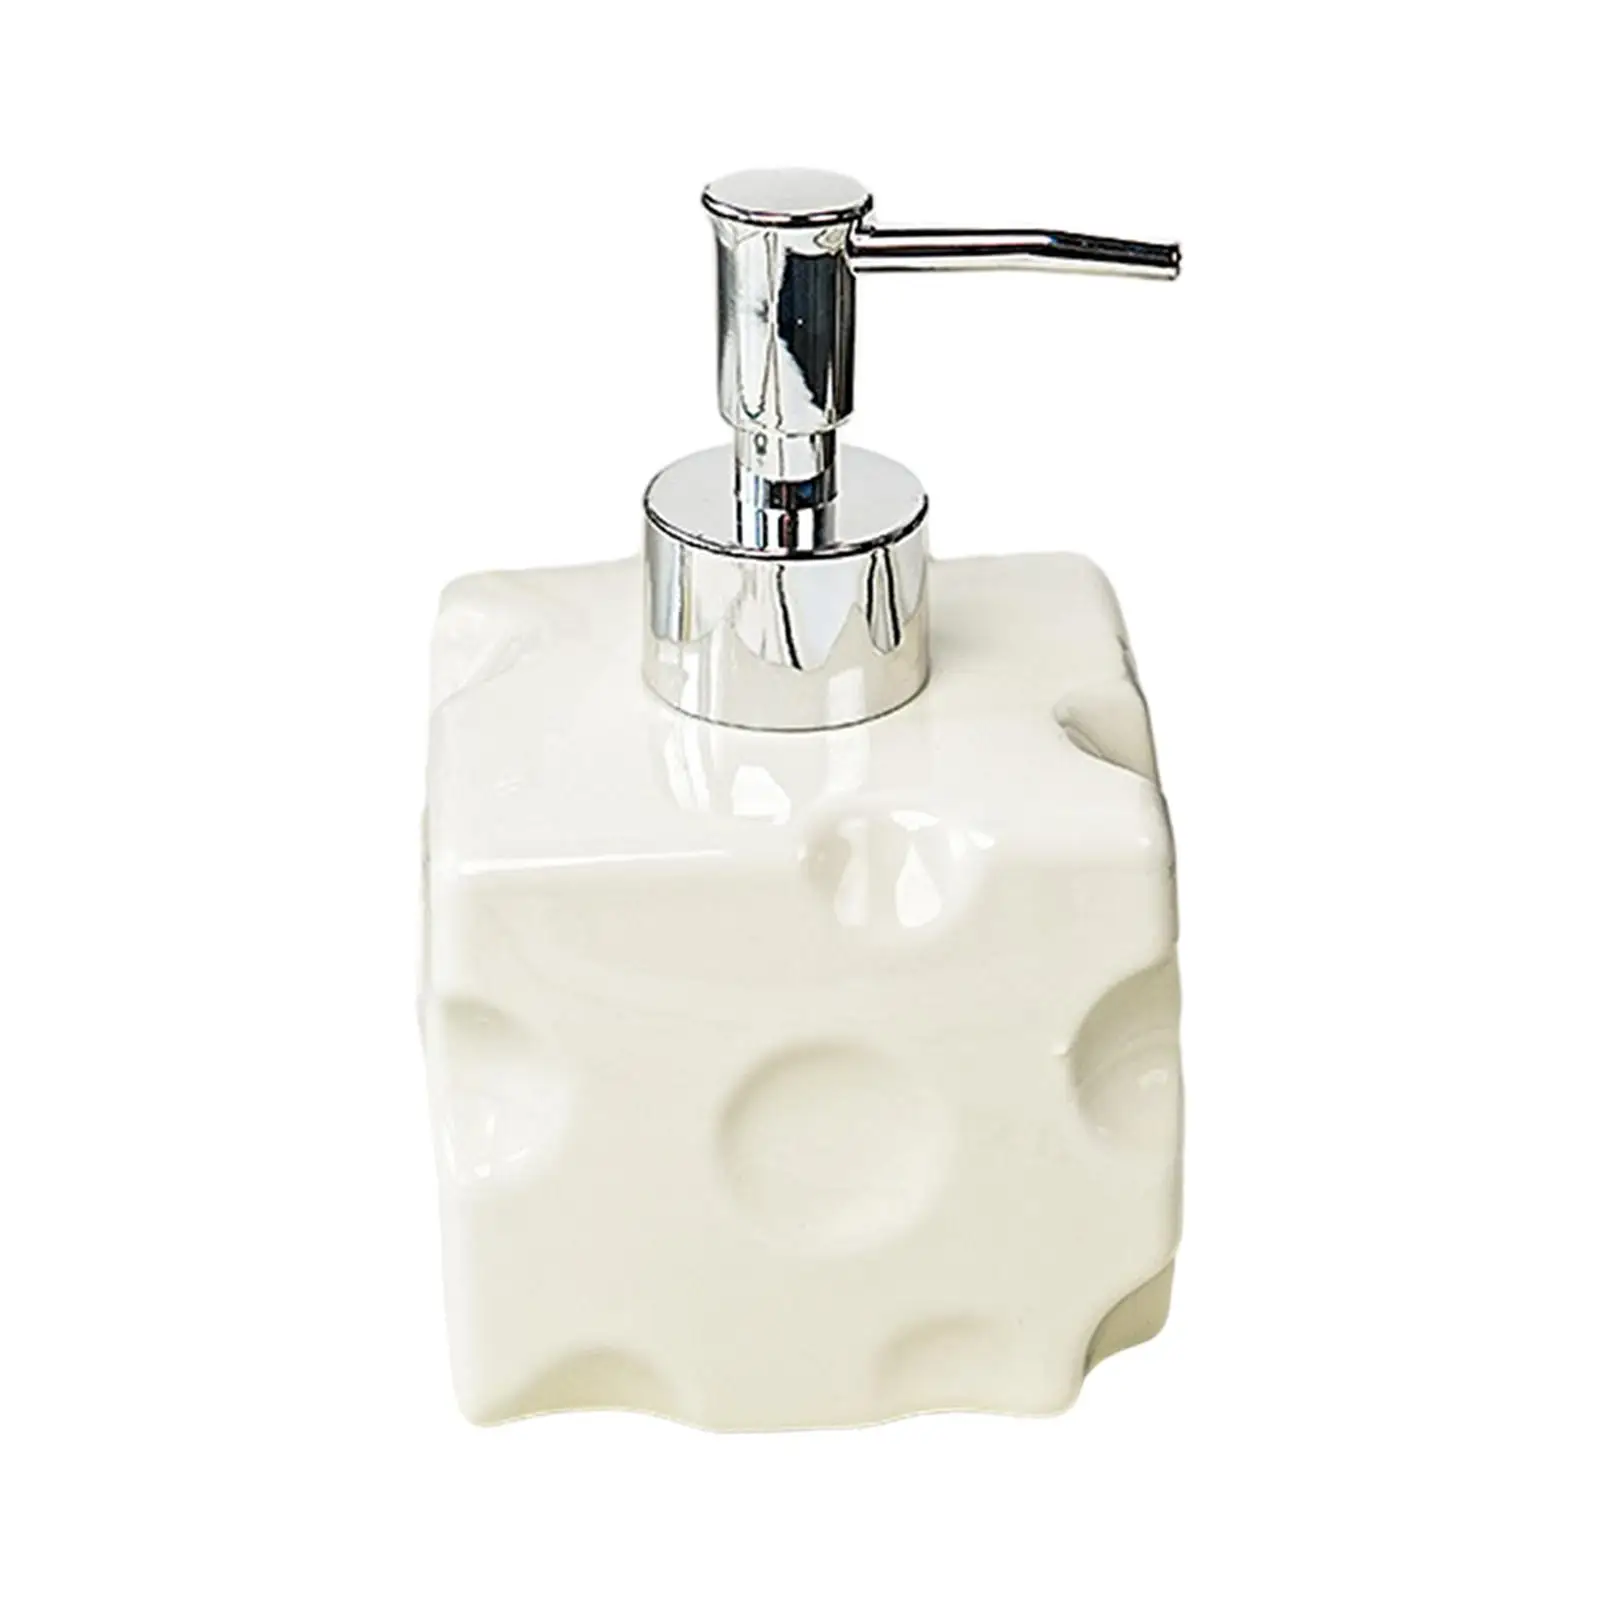 Ceramic Soap Dispenser Easy to Fill Leakproof Pump Soap Container Refillable for Farmhouse Washroom Kitchen Countertop Vanity